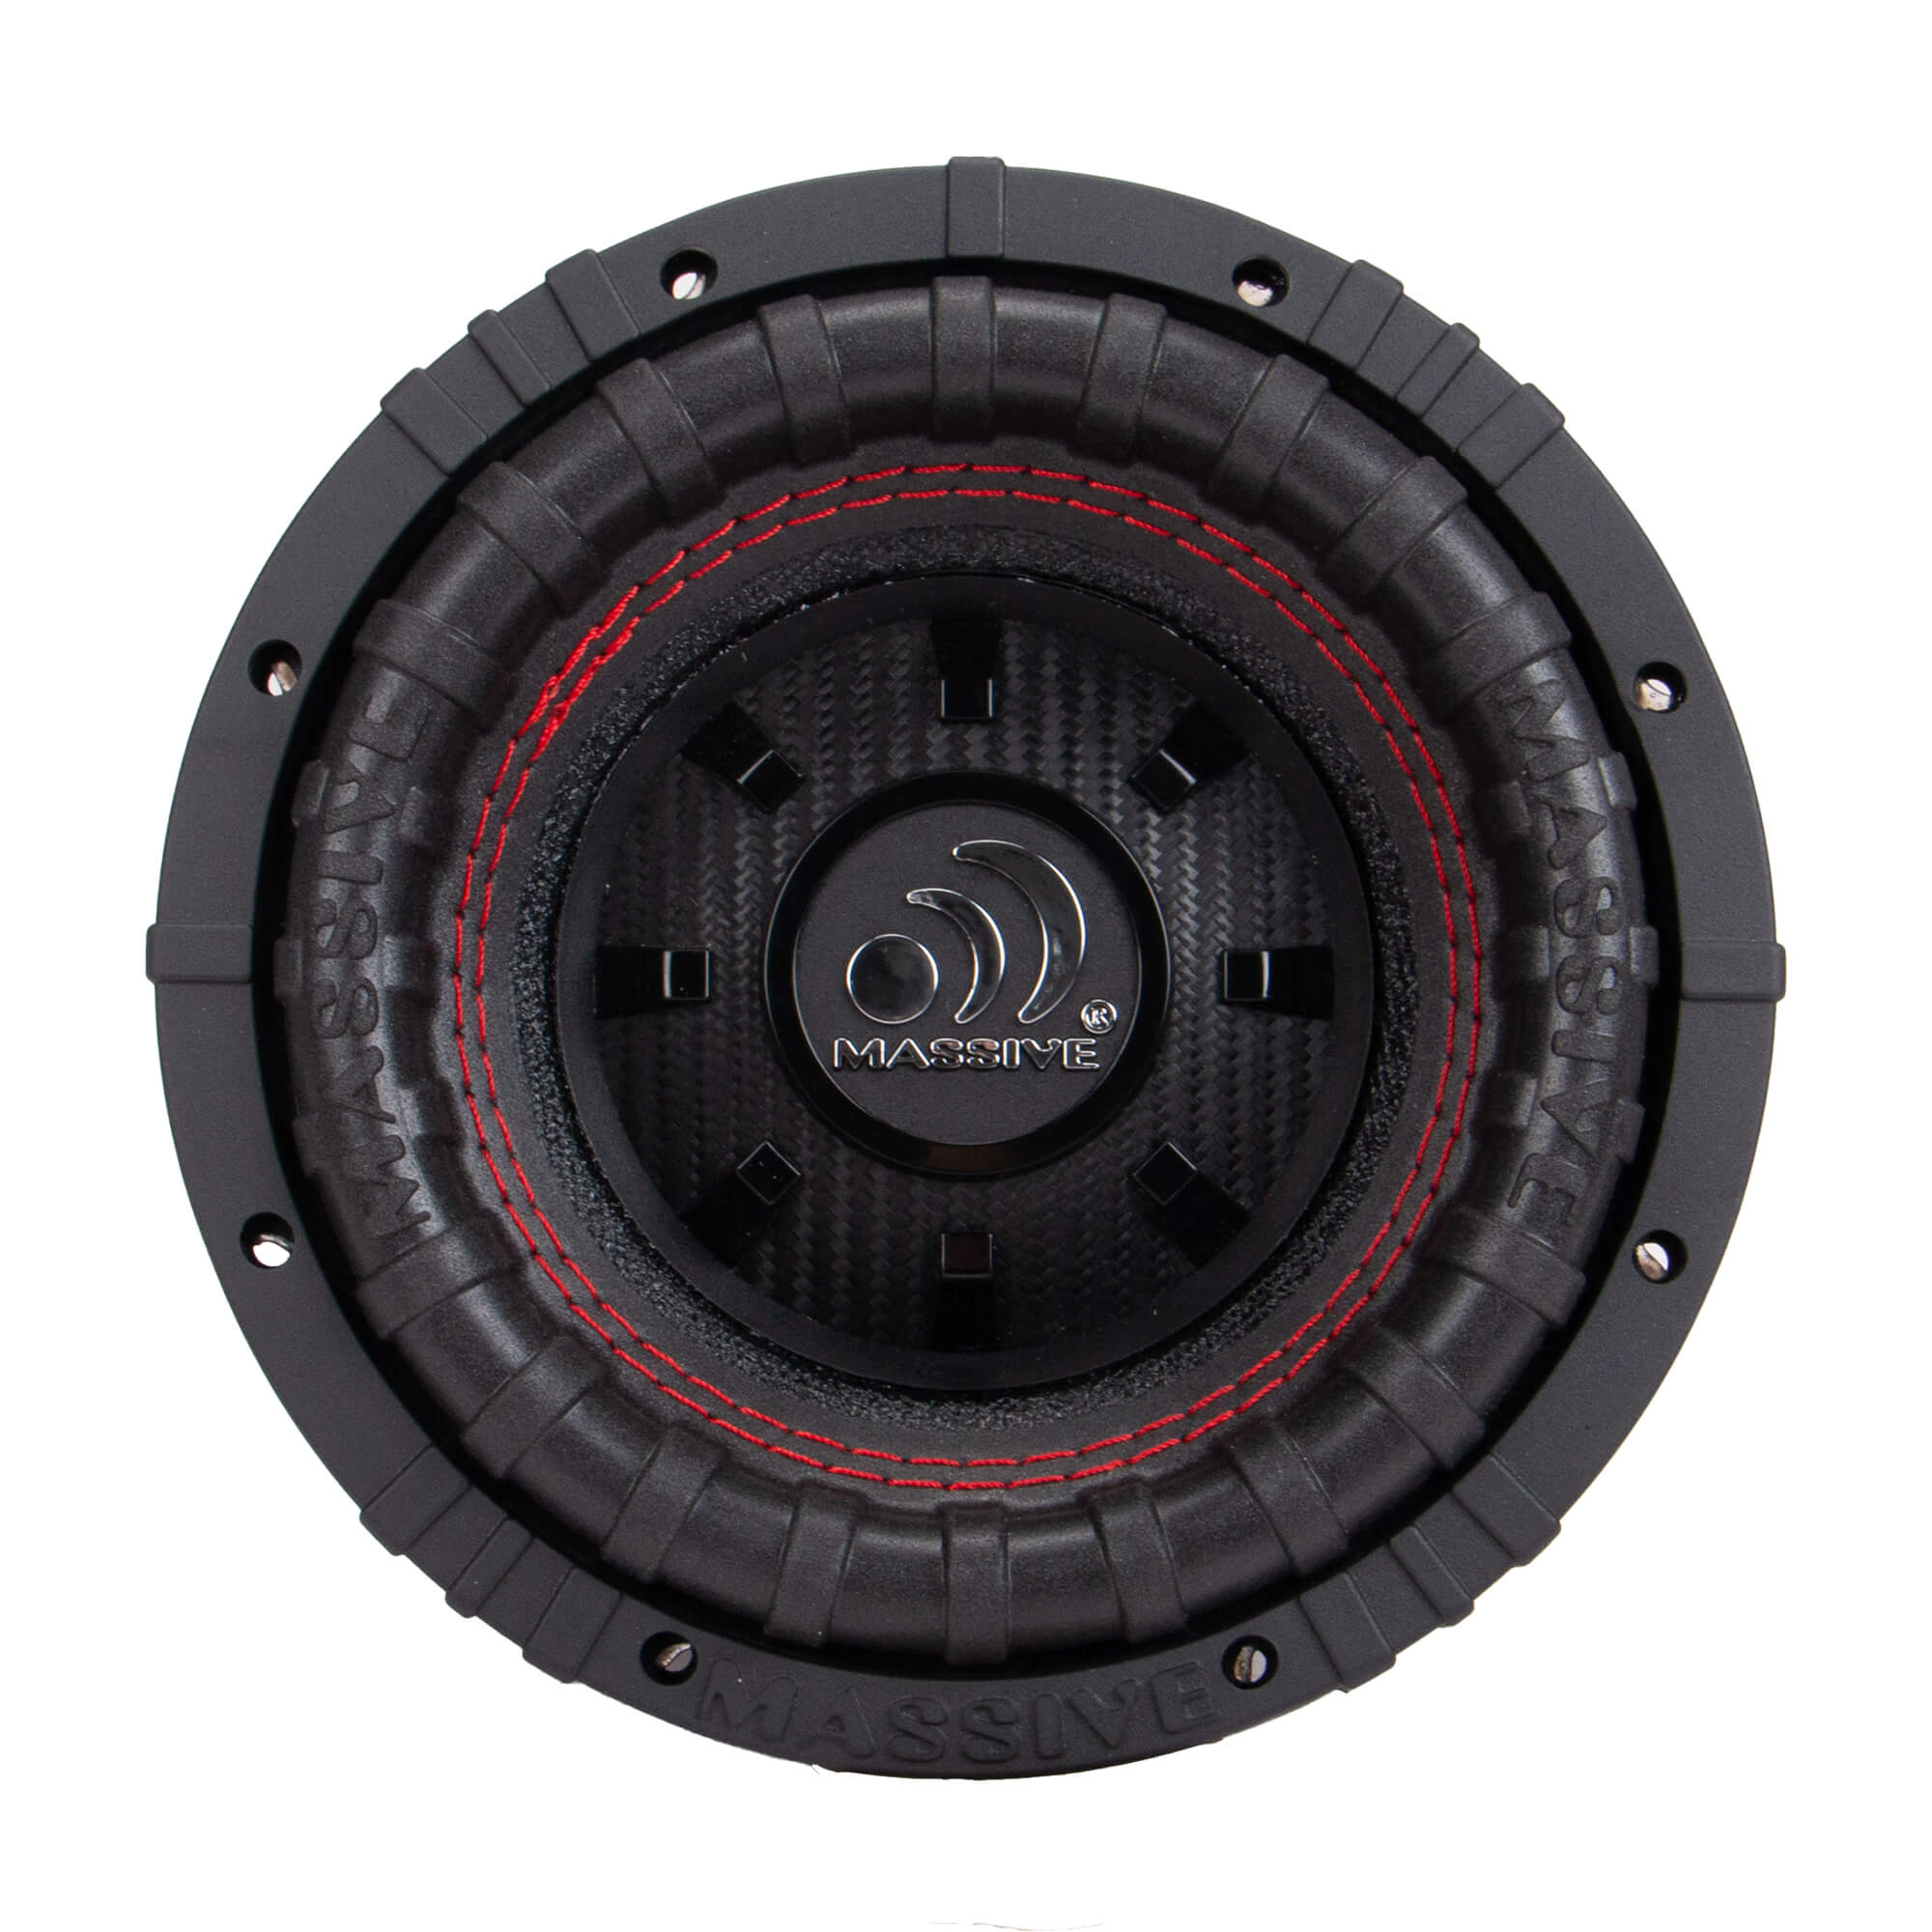 GTR64 - 6.5" 350 Watts RMS Dual 4 Ohm Subwoofer